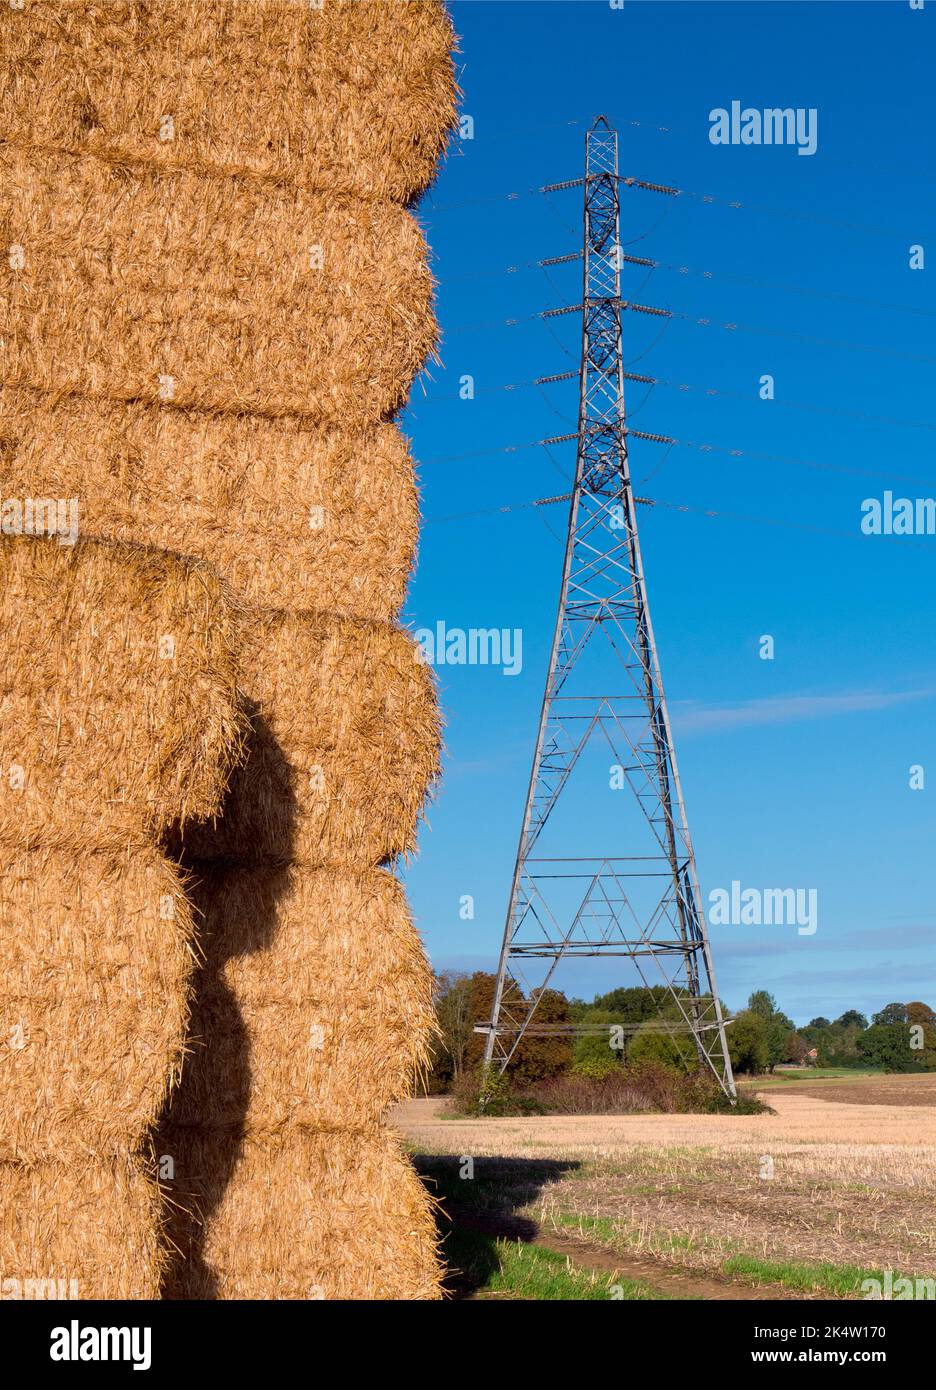 It's just after harvest time. Seen in a corn field just outside my home village of Radley, Oxfordshire, this giant haystack seems to have transcended Stock Photo